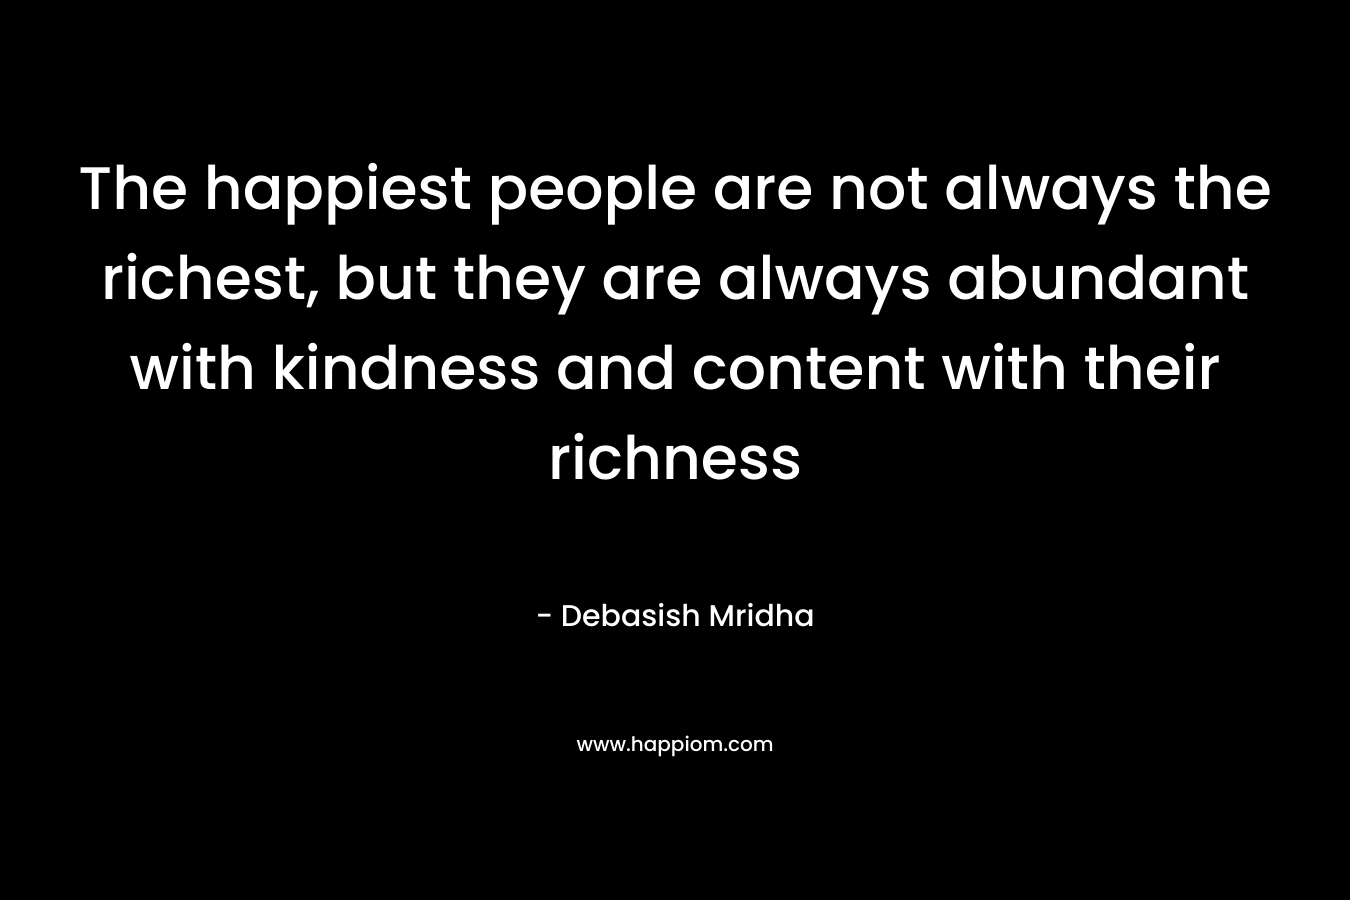 The happiest people are not always the richest, but they are always abundant with kindness and content with their richness – Debasish Mridha